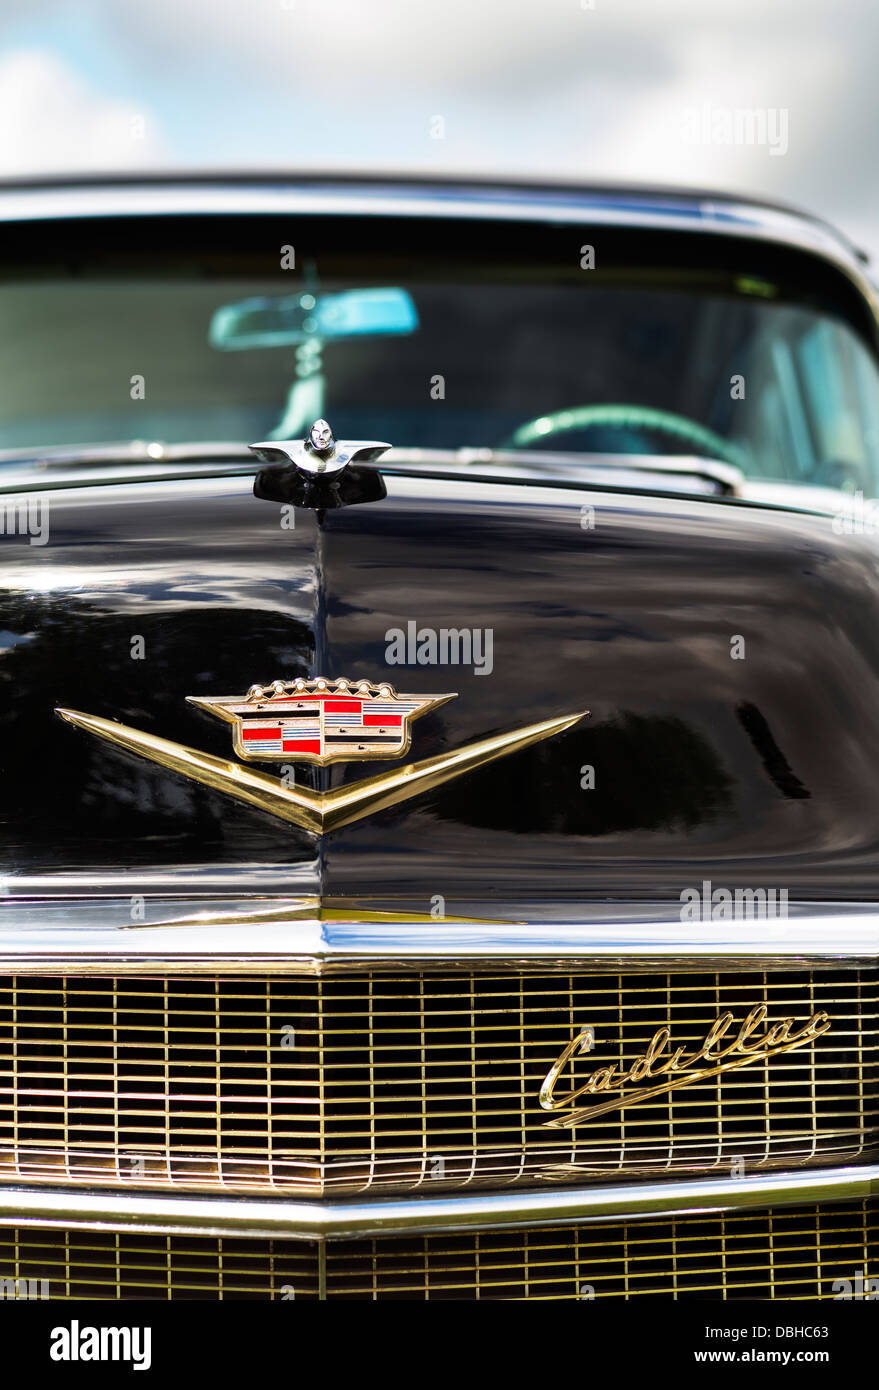 1956 Cadillac Fleetwood front end detail. Classic American car Stock Photo